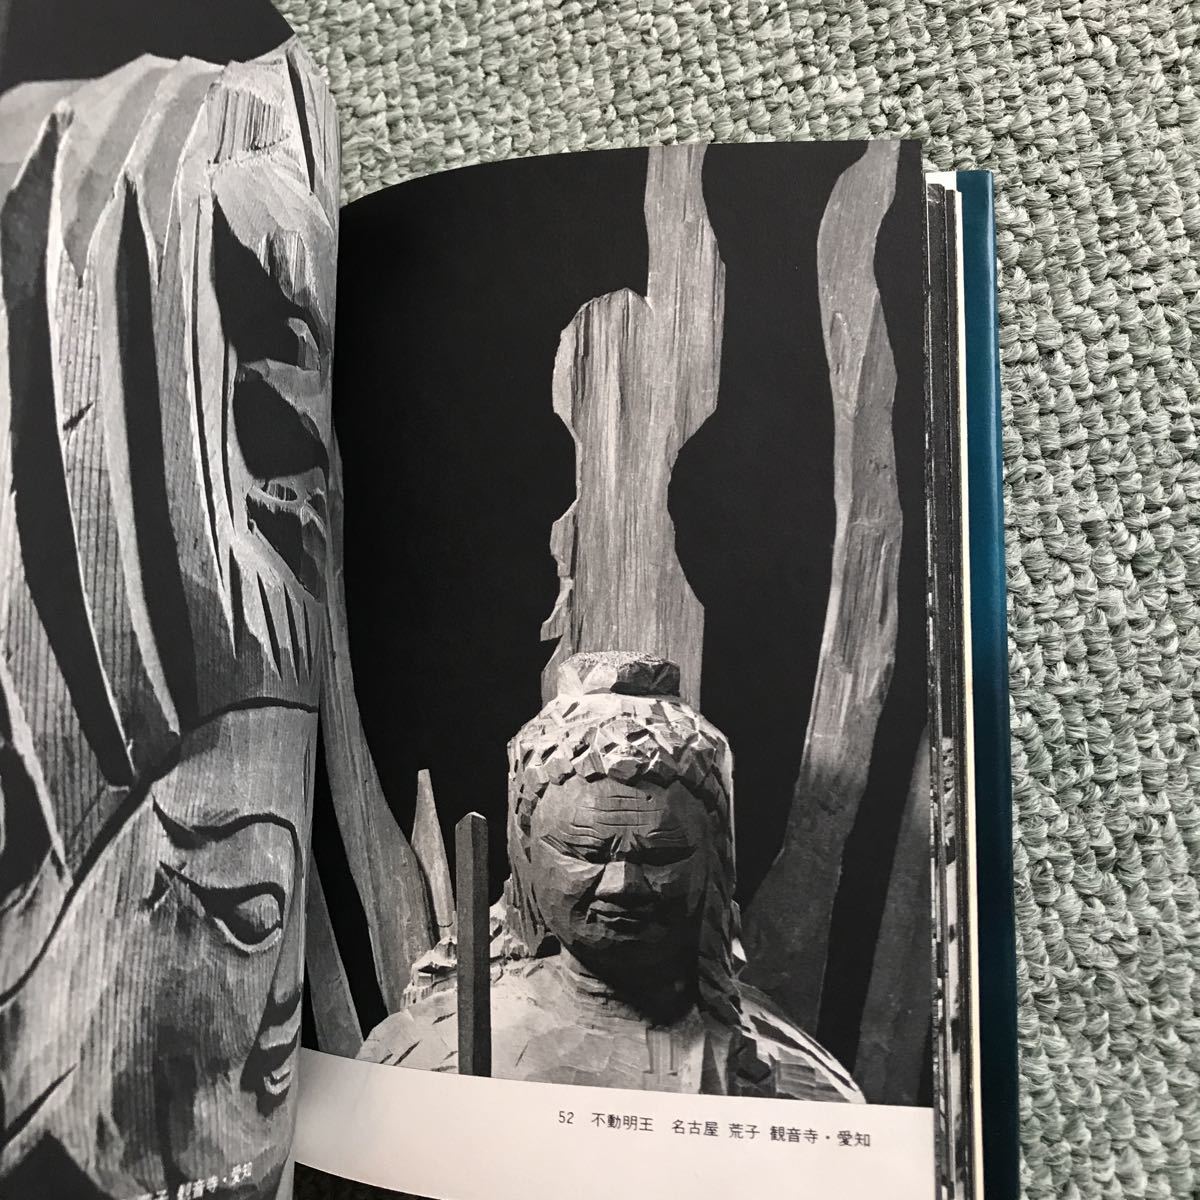  jpy empty .... work book@ tree carving Buddhist image sculpture 